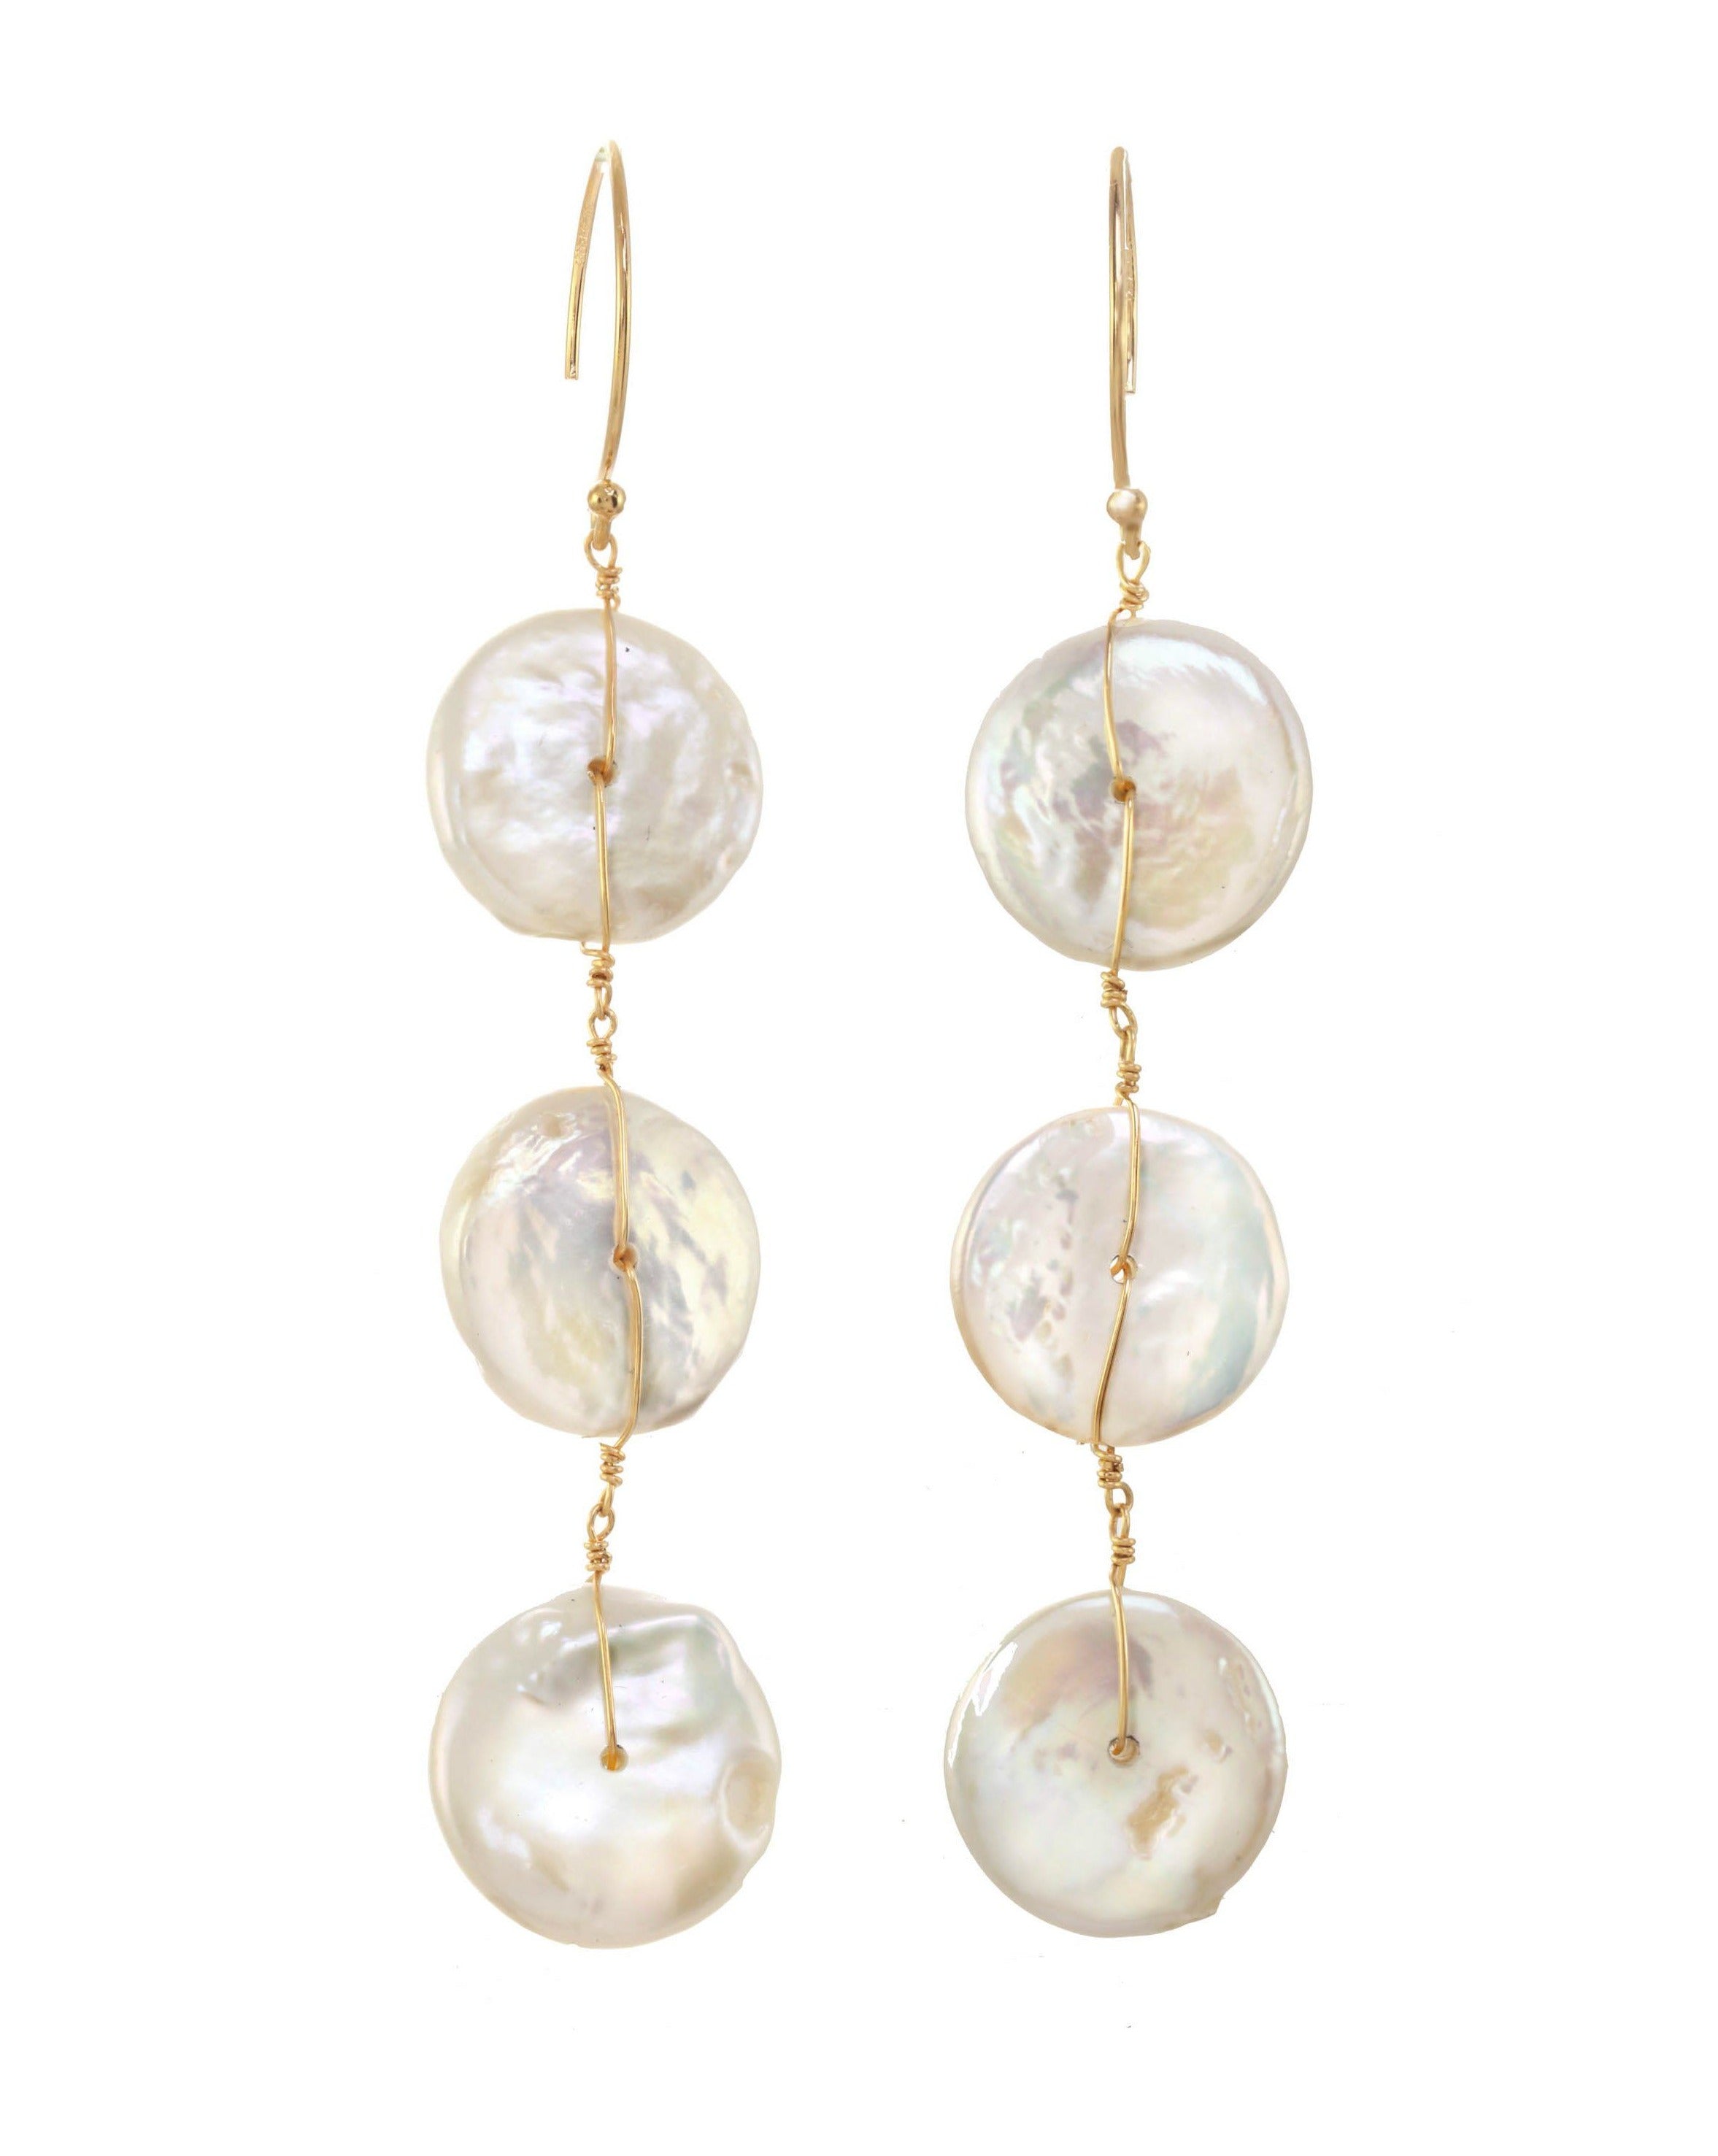 Pamela Earrings by KOZAKH. Round hook earrings crafted in 14K Gold Filled, featuring Keshi white Pearls.